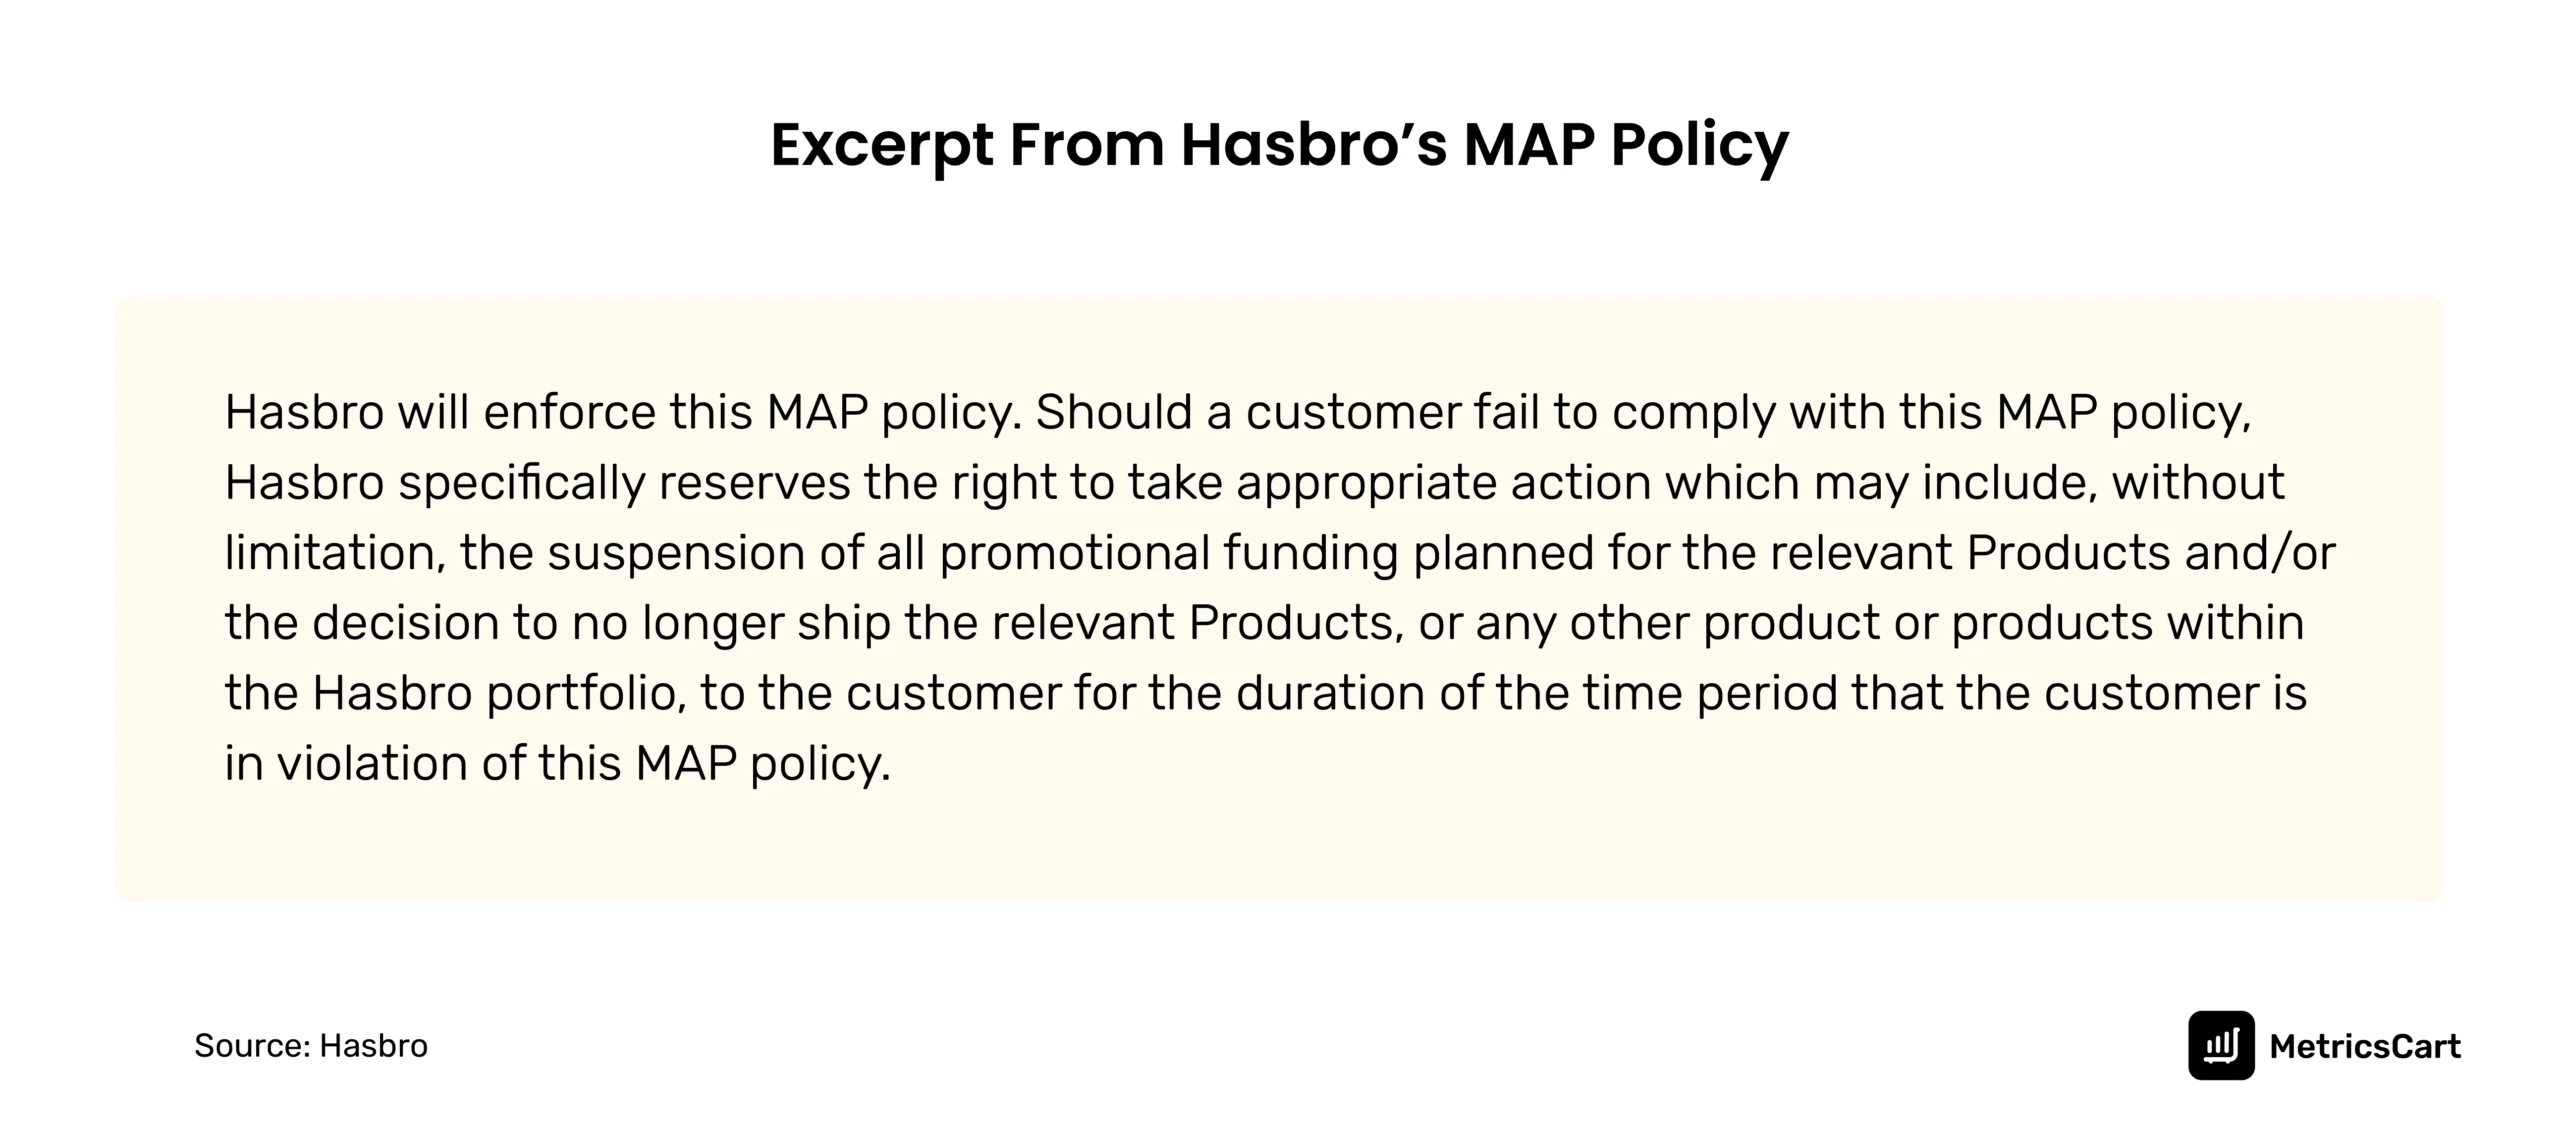 An excerpt from the MAP policy document of Hasbro. 